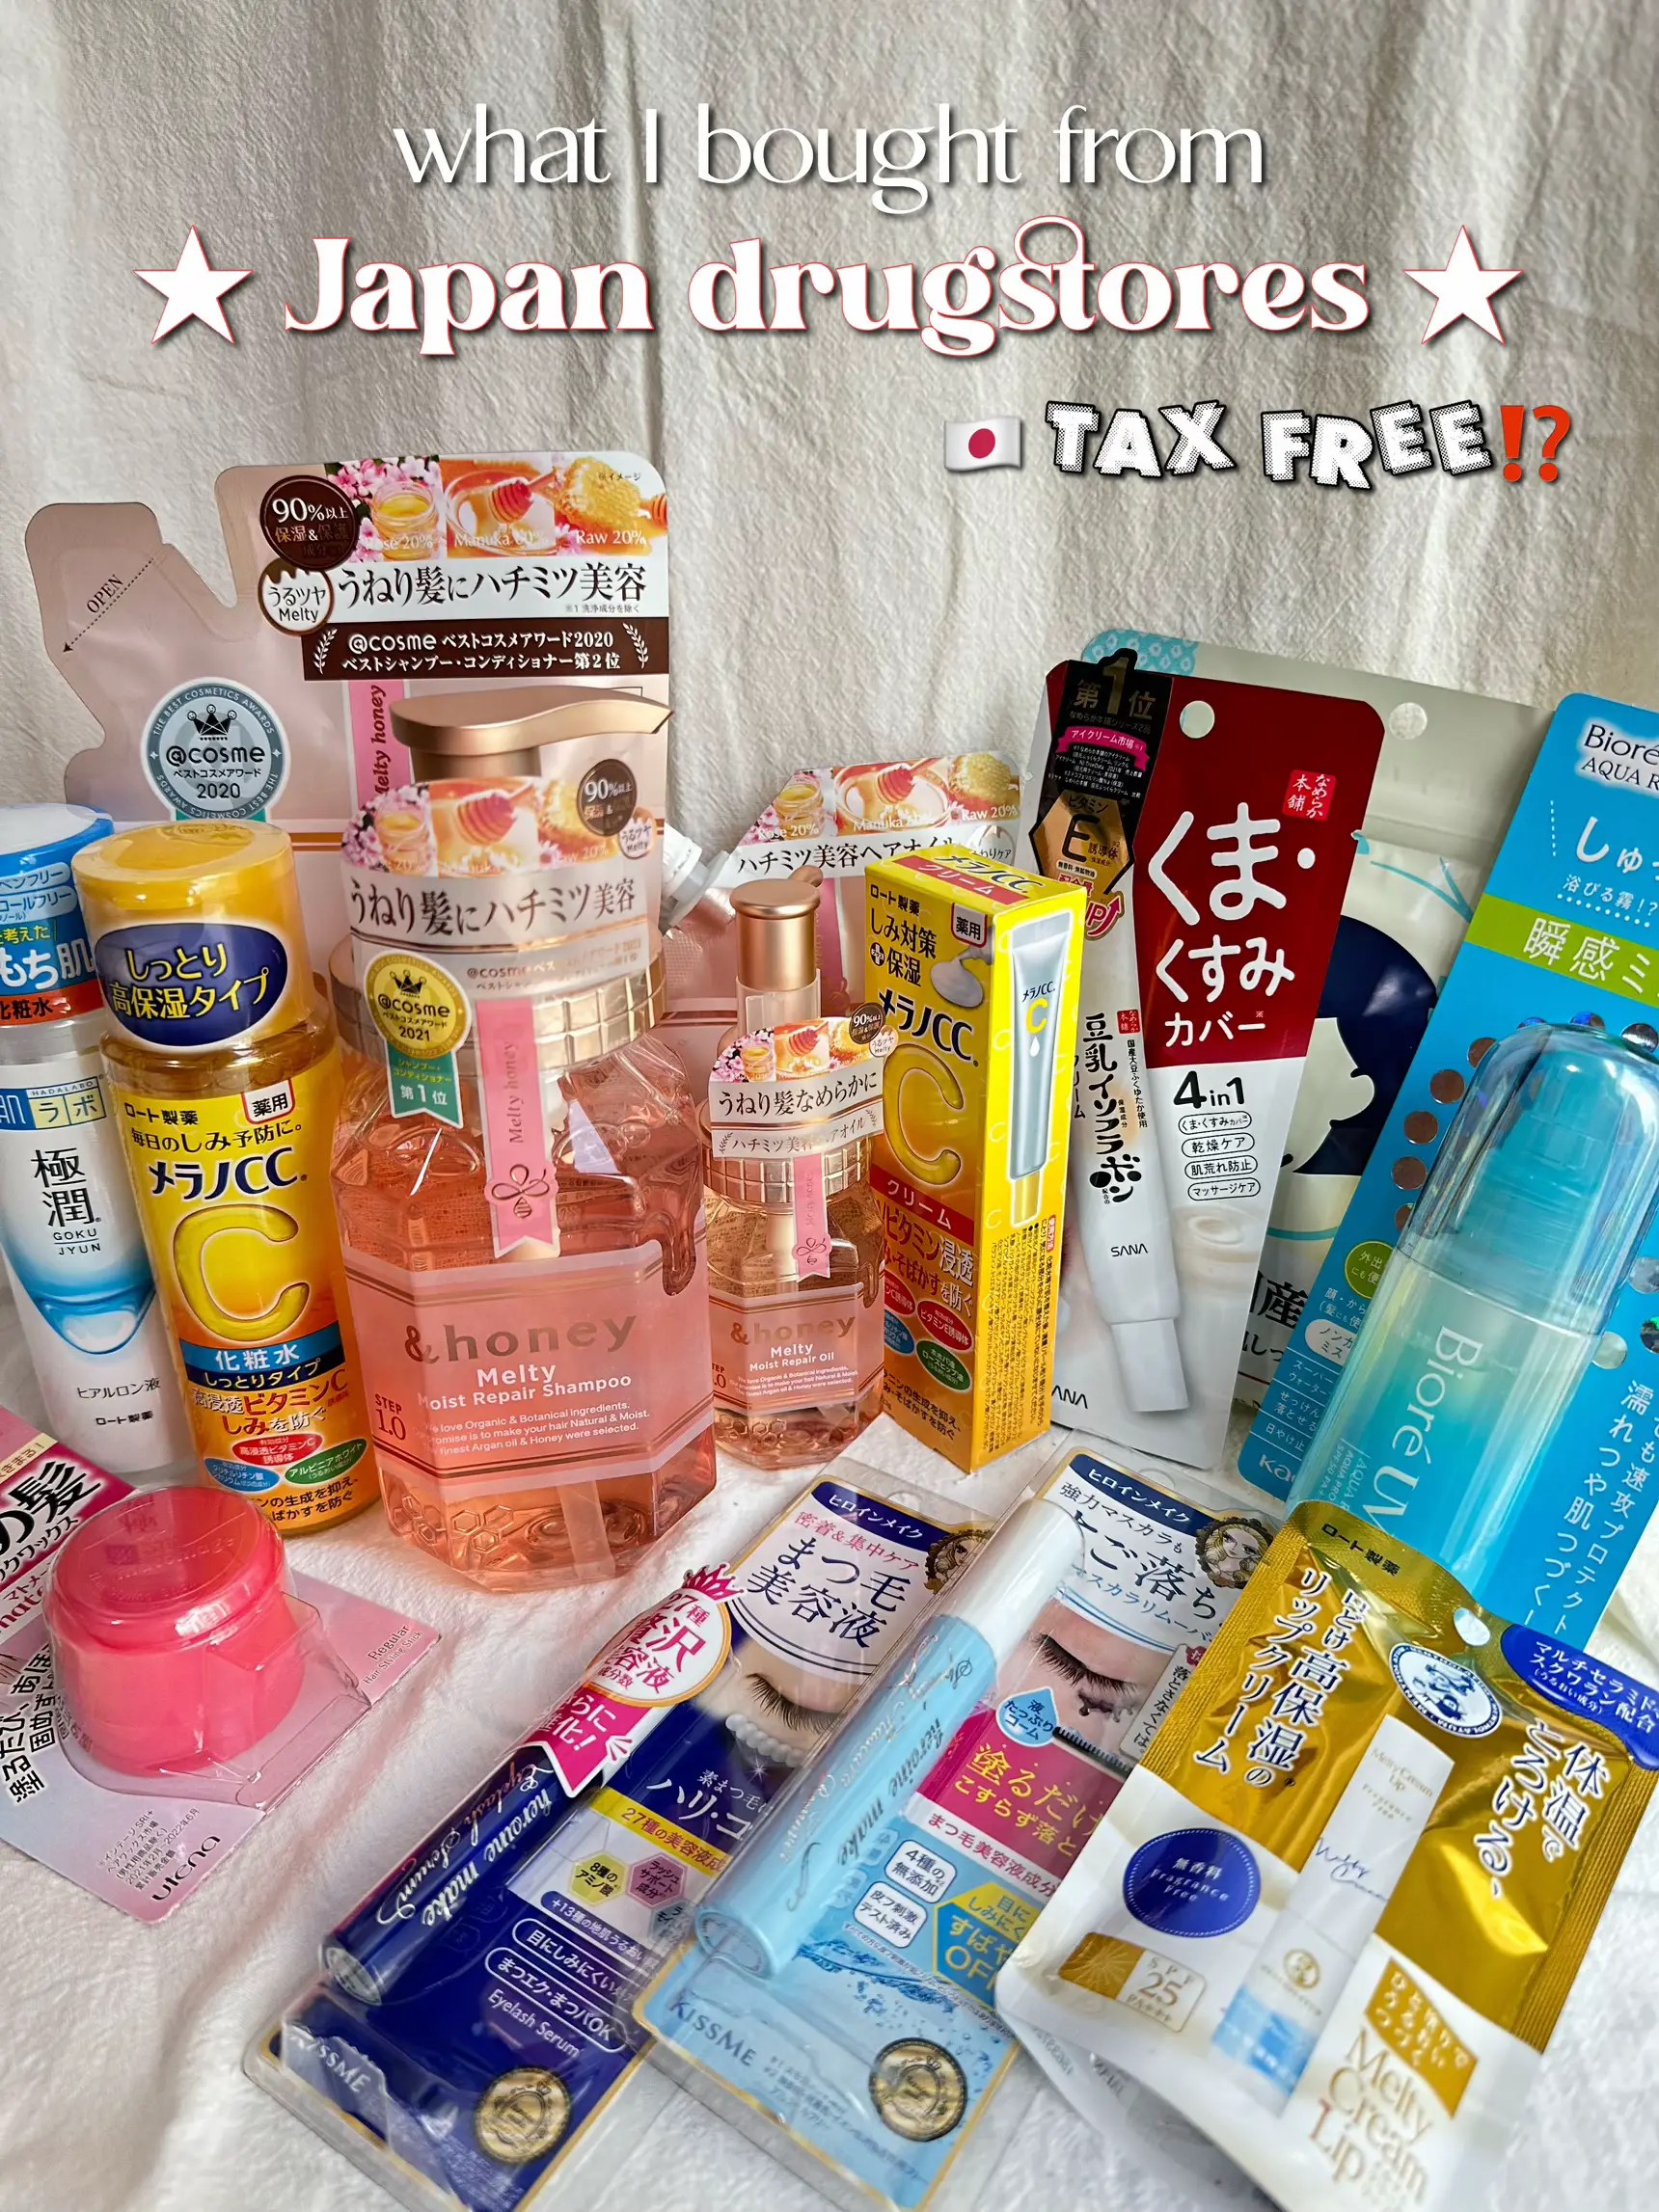 finally got my hands on these j-beauty products🇯🇵🩷's images